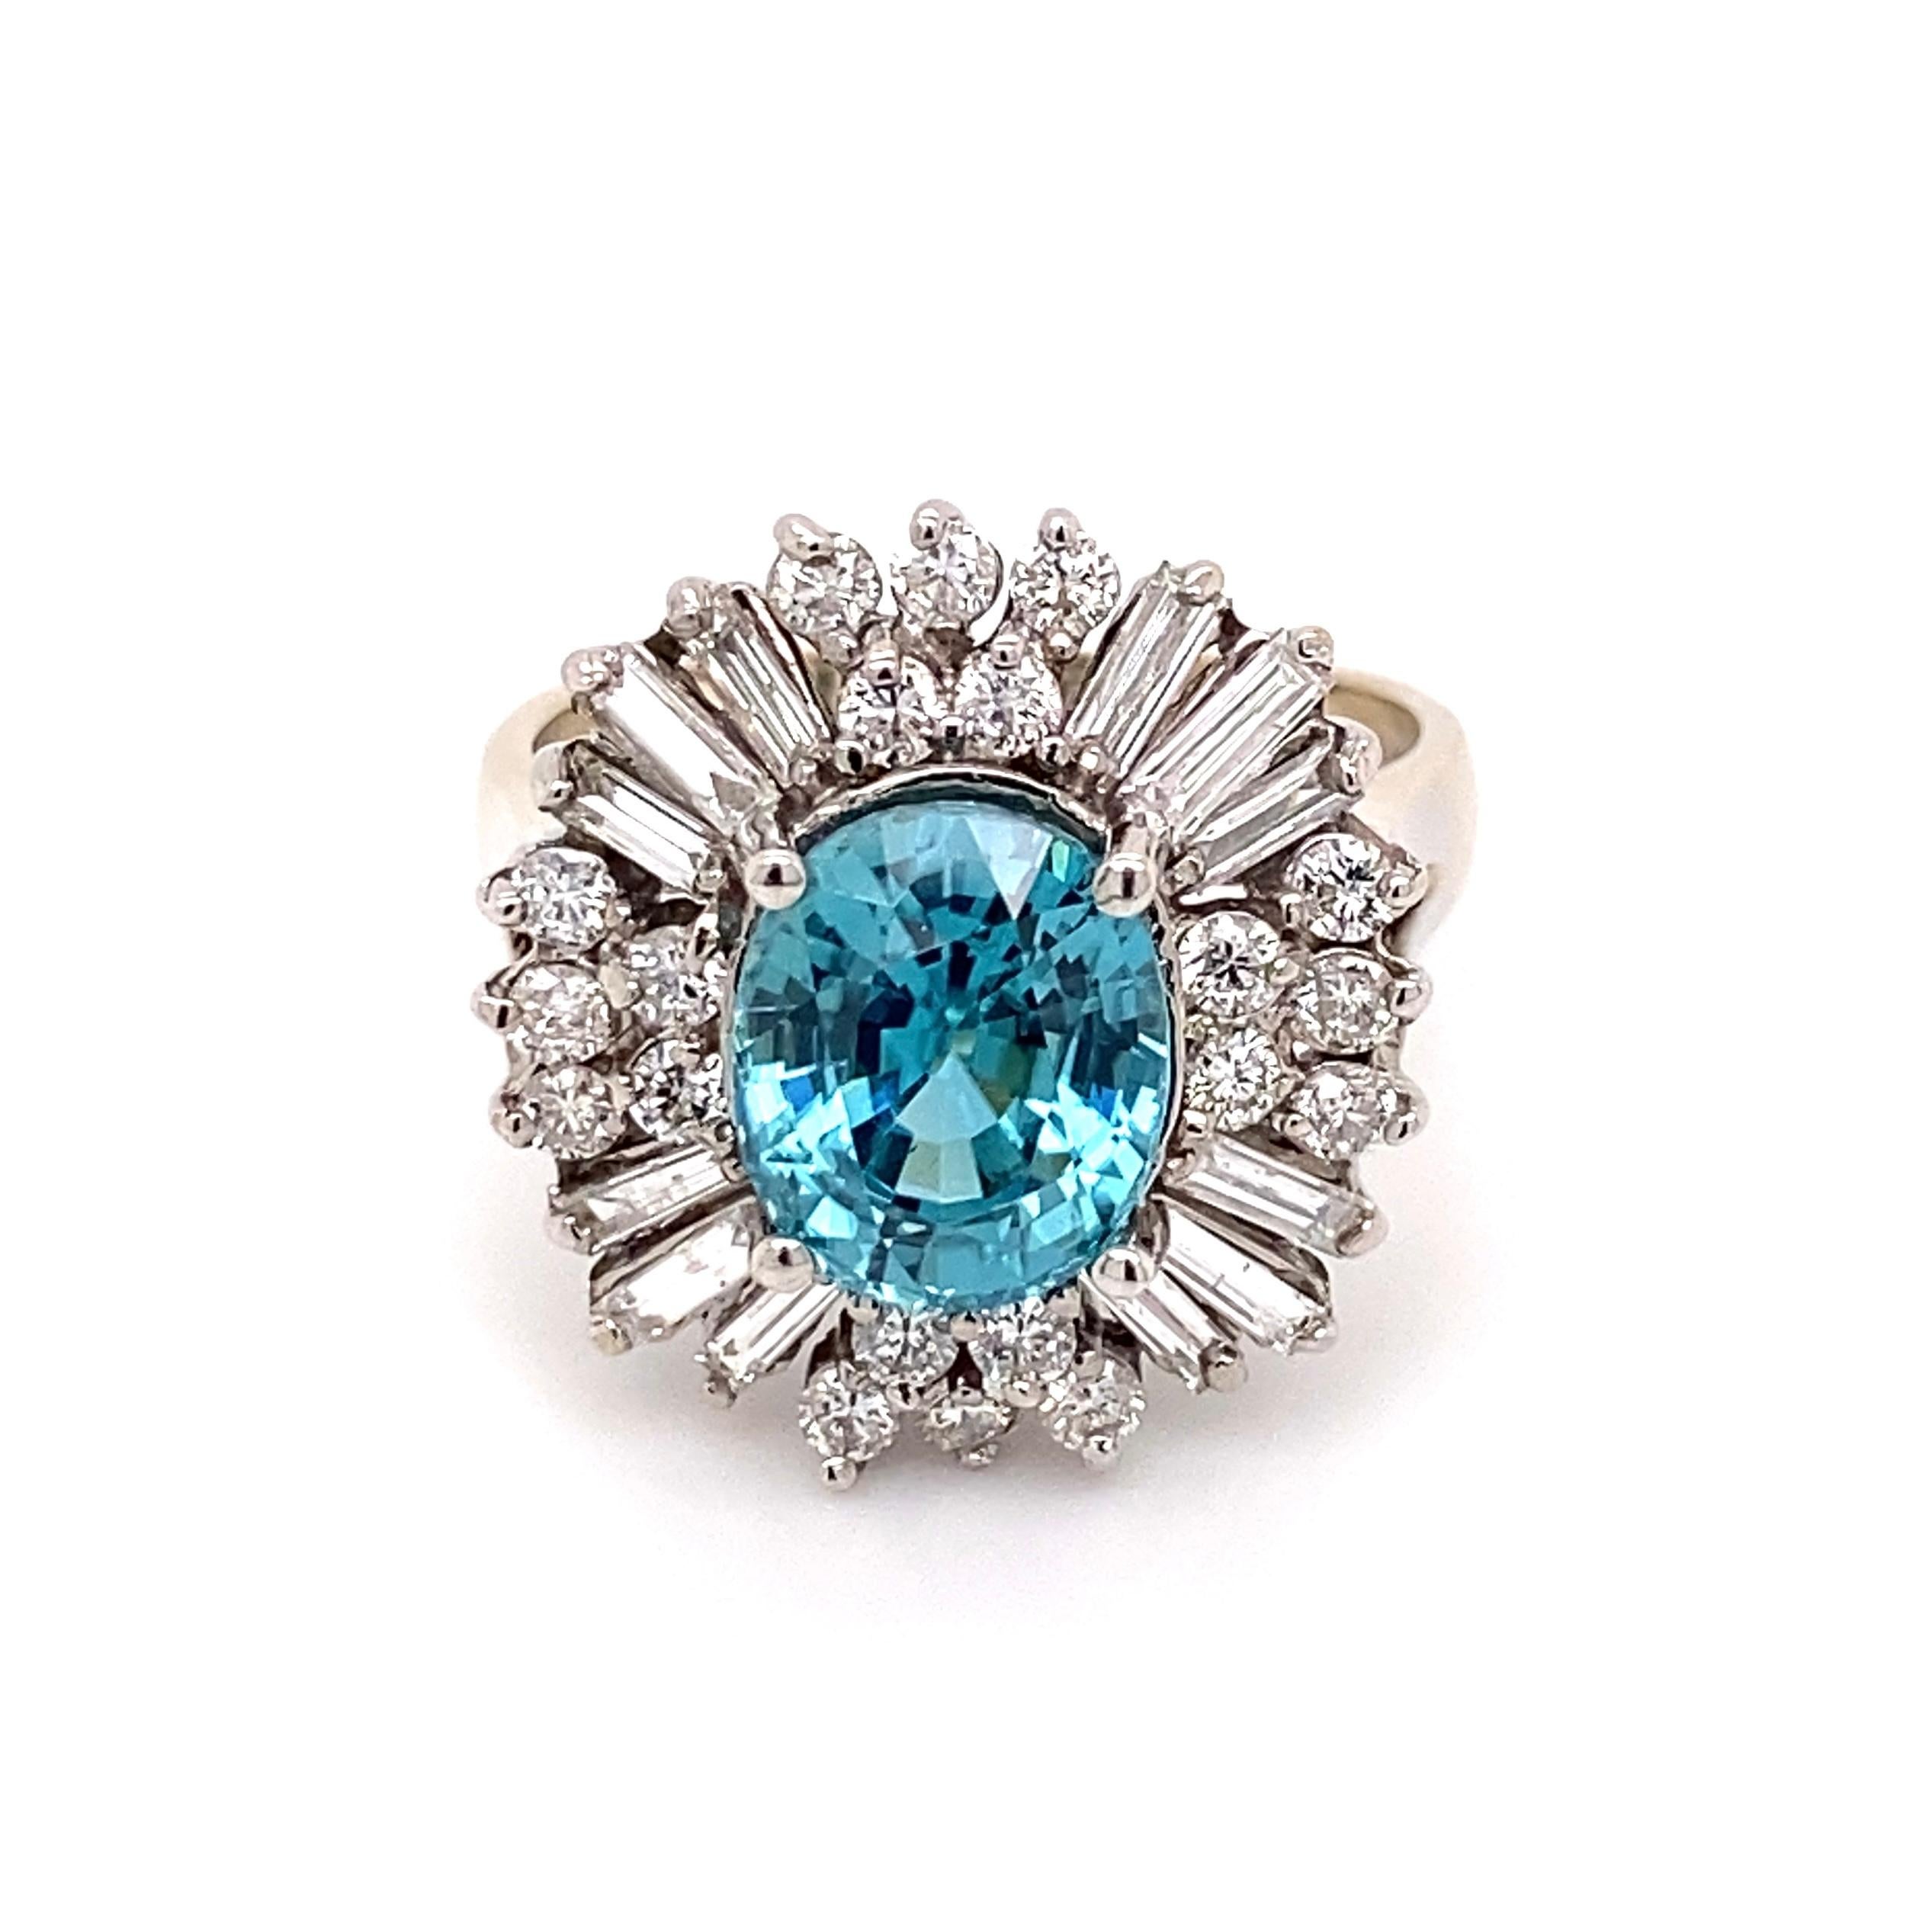 4.50 Carat Blue Zircon and Diamond Cocktail Ring Estate Fine Jewelry In Excellent Condition For Sale In Montreal, QC